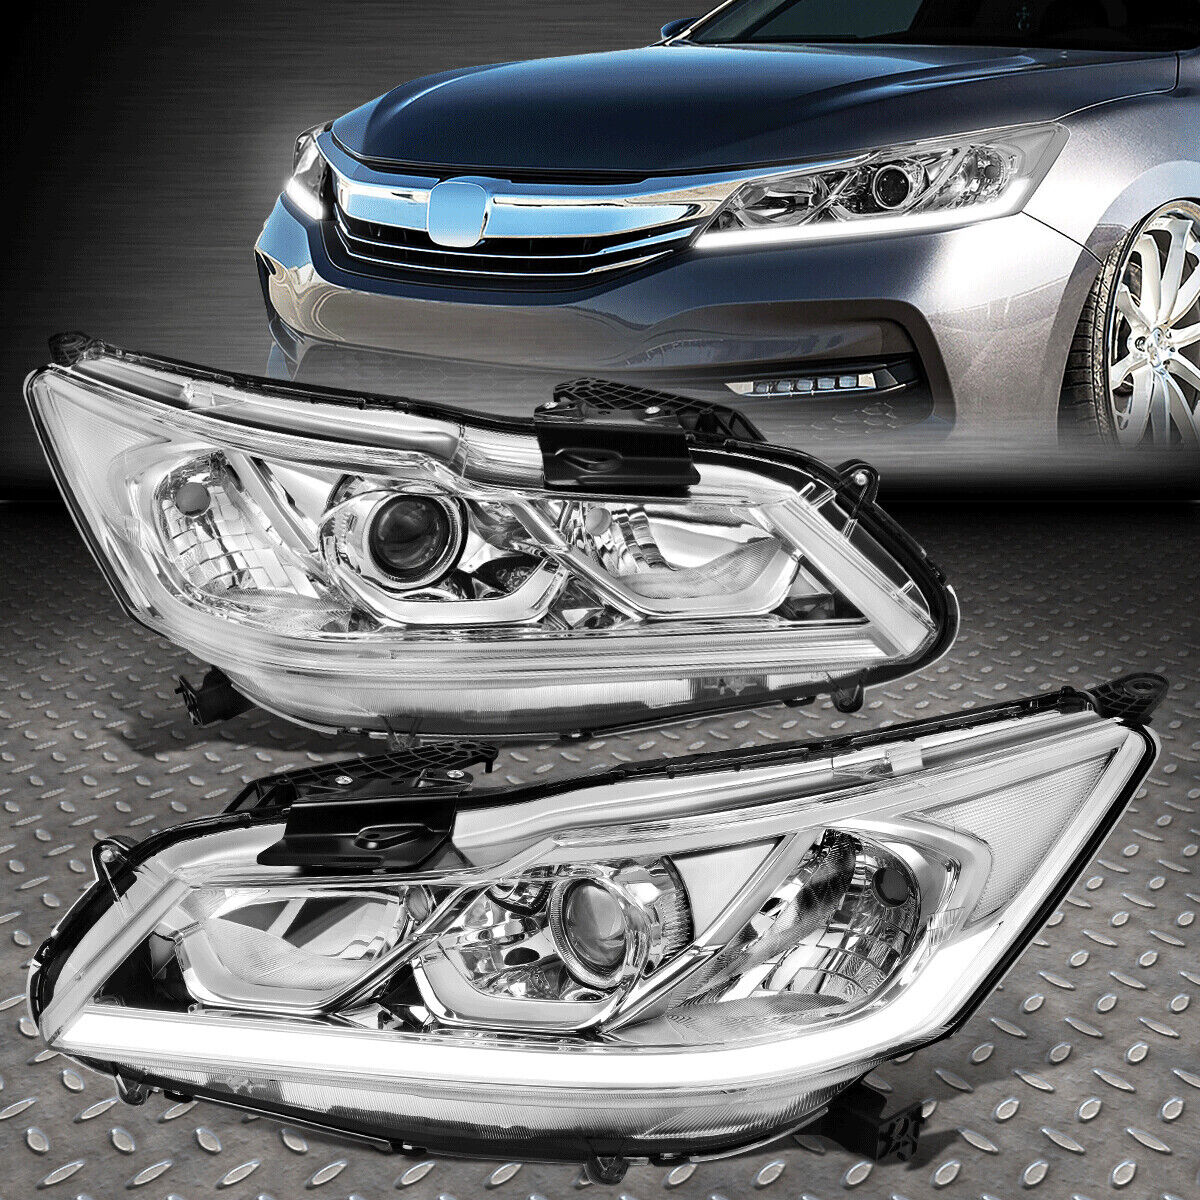 [LED DRL]FOR 16-17 HONDA ACCORD EX SE SPORT PROJECTOR HEADLIGHTS CHROME/CLEAR